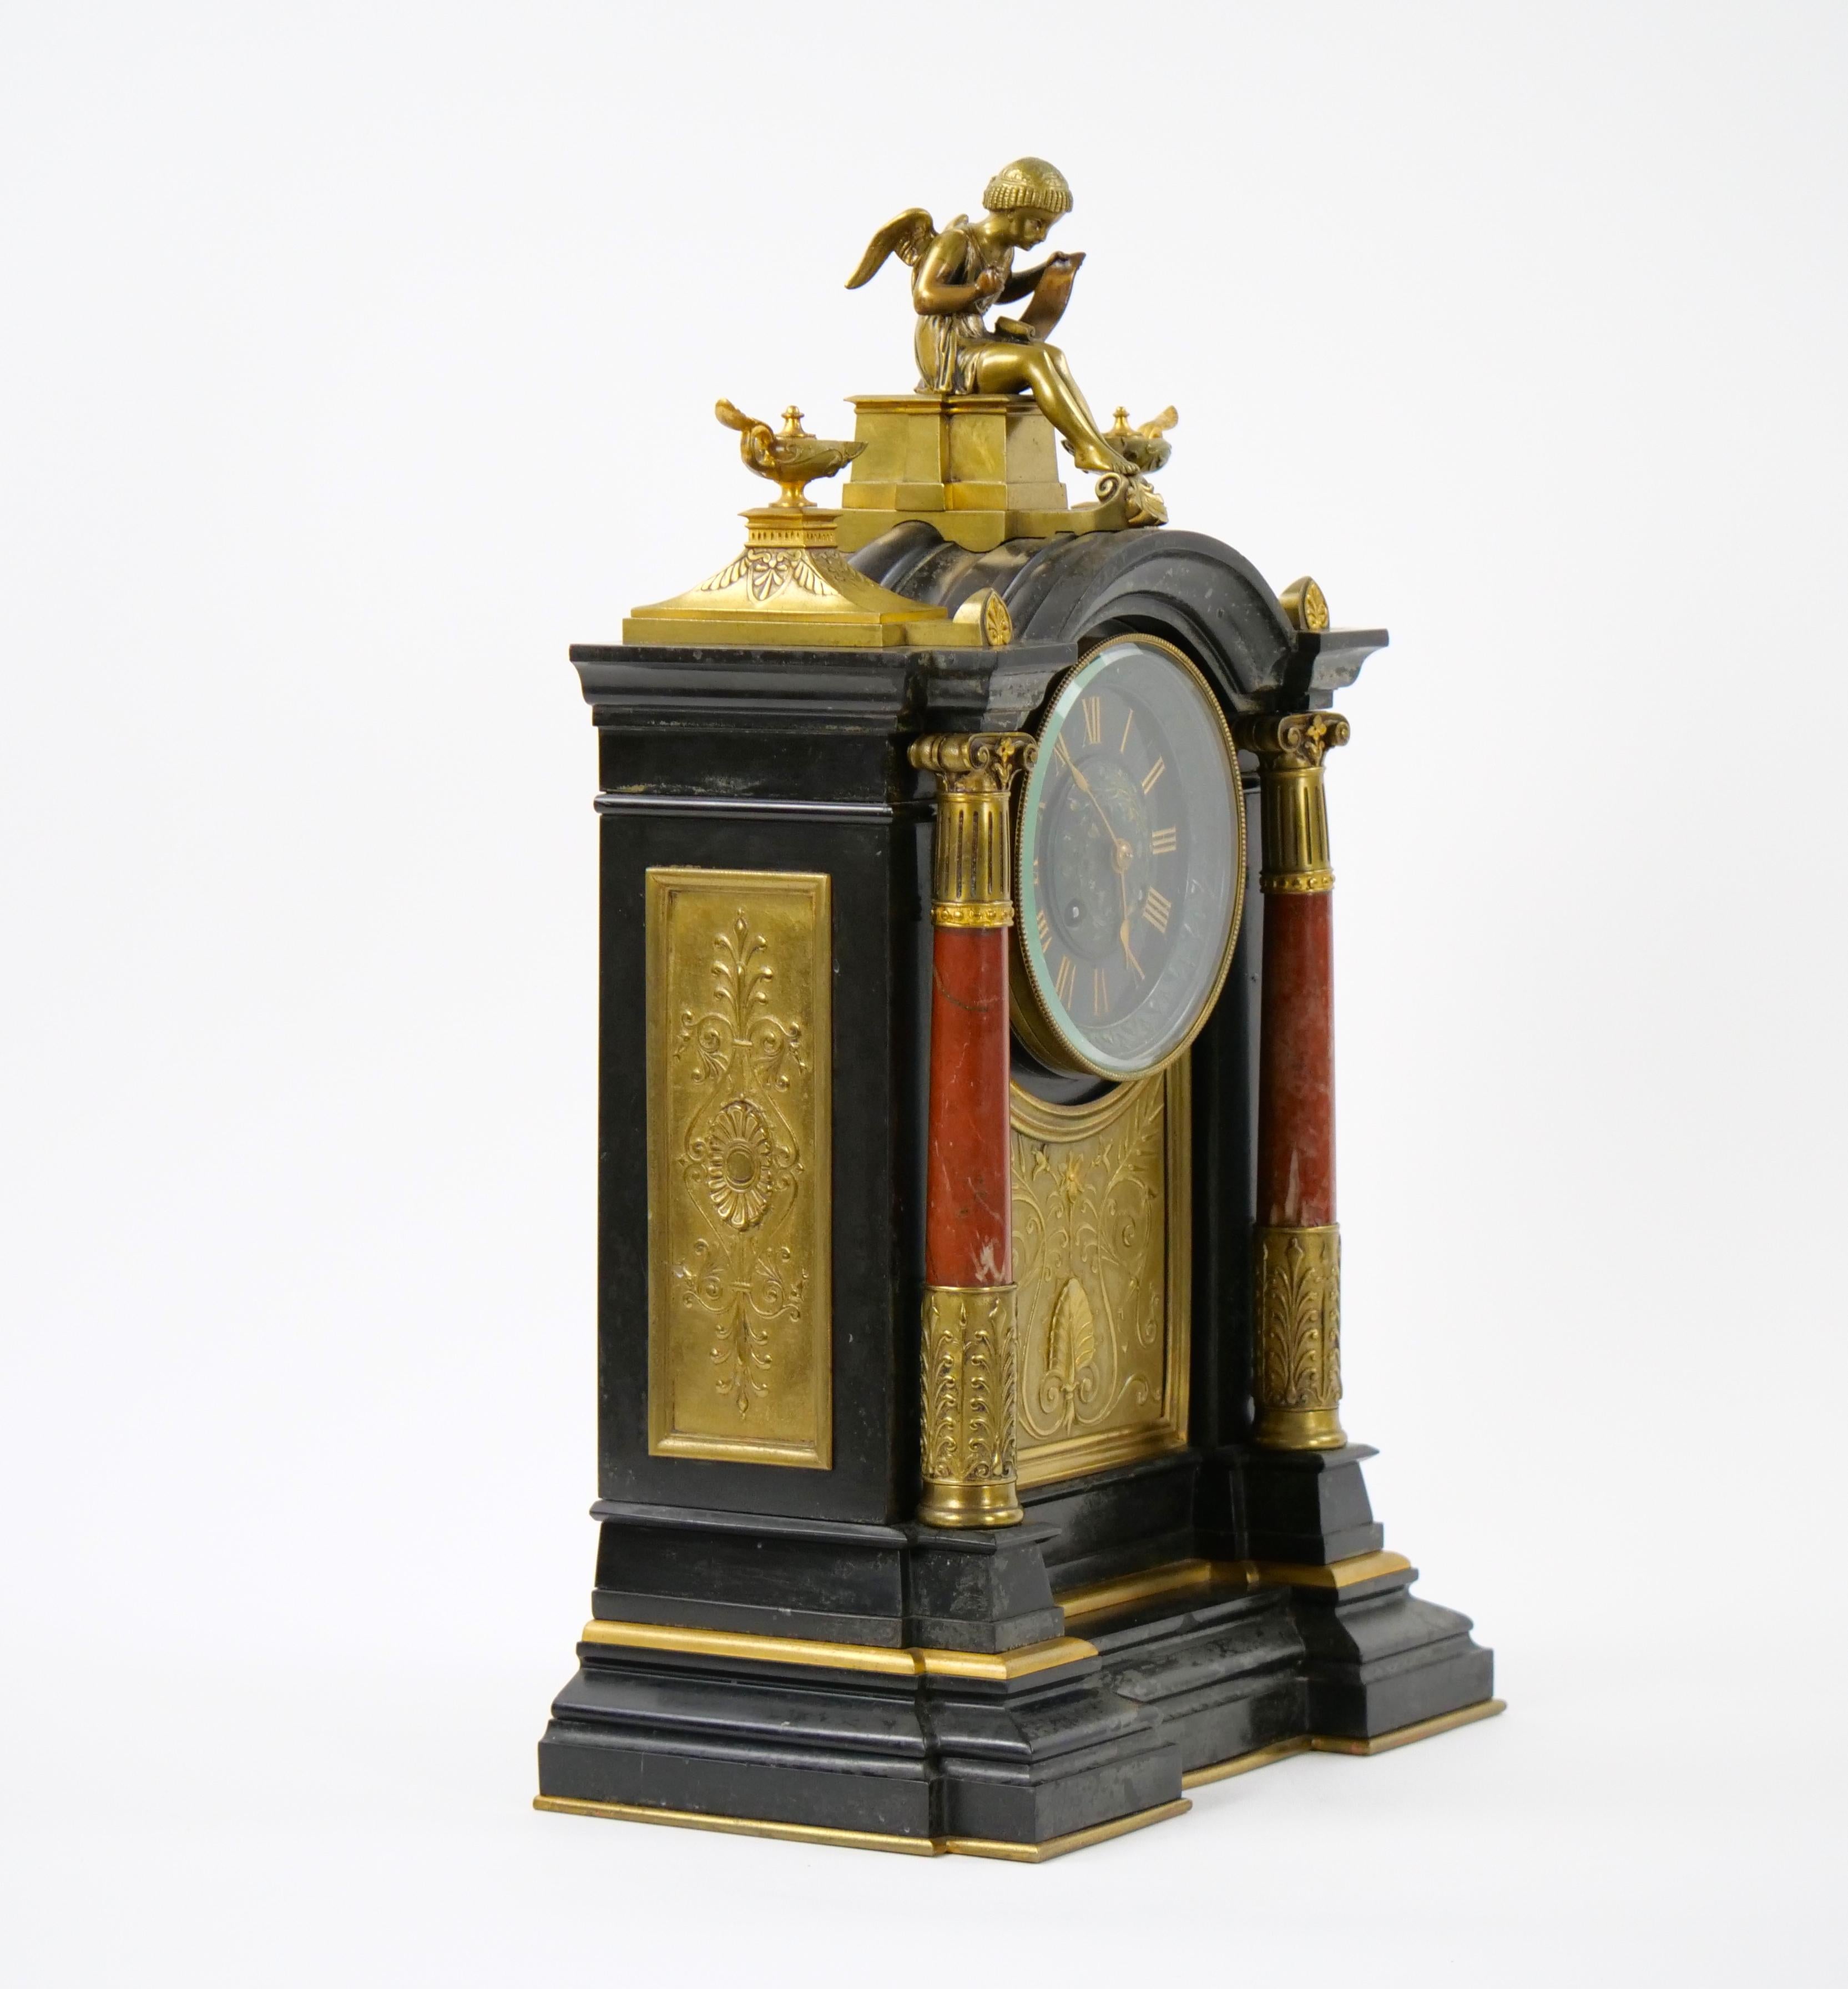 Transport yourself to the grandeur of the 19th century with this exquisite French Marble and Bronze Figural Mantel Clock. A true masterpiece of artistry and craftsmanship, this clock is adorned with intricate details that capture the essence of an